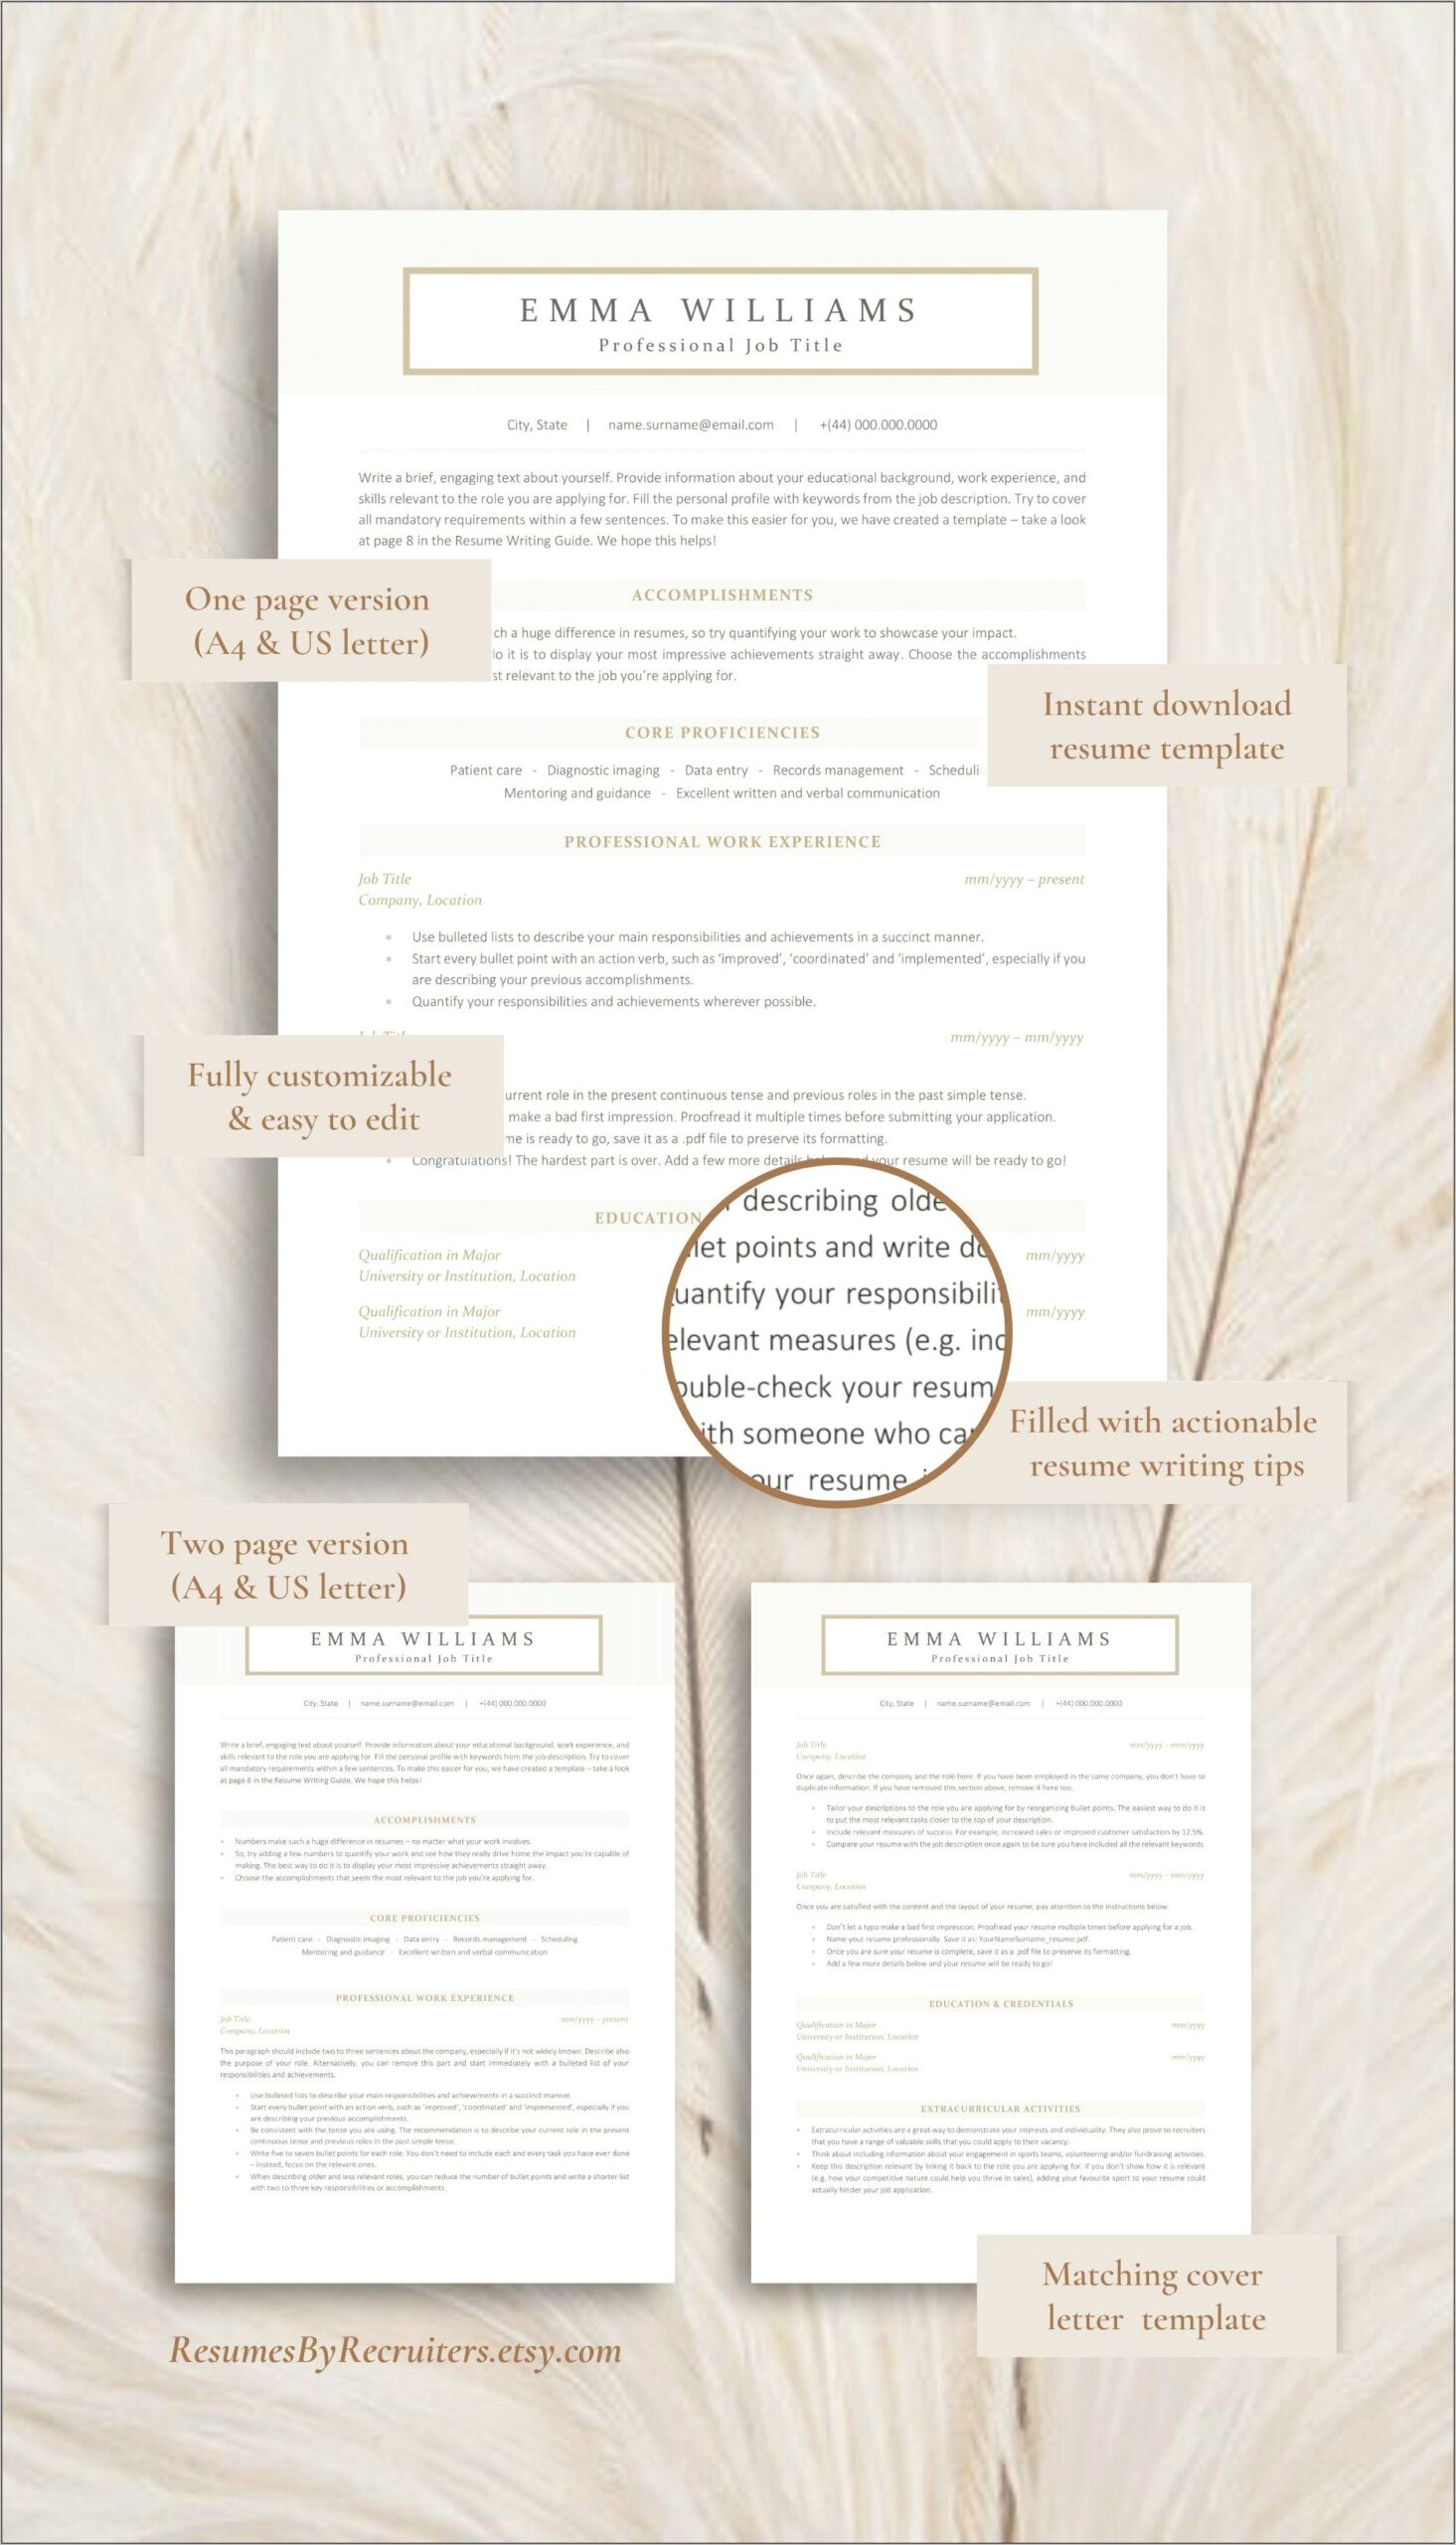 For Resumes Is It Bad To Use Templates